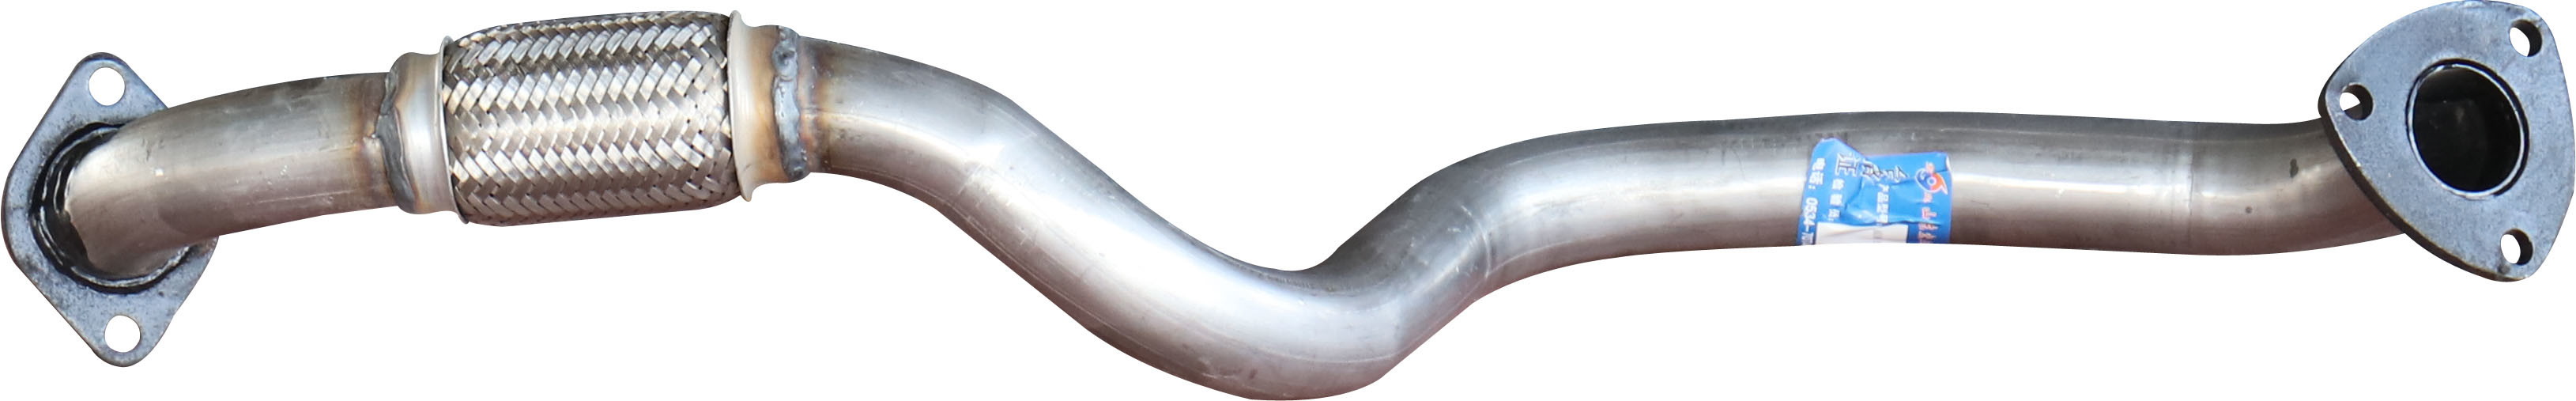 Hot Sell Car Parts Exhaust Muffler From Chinese Factory